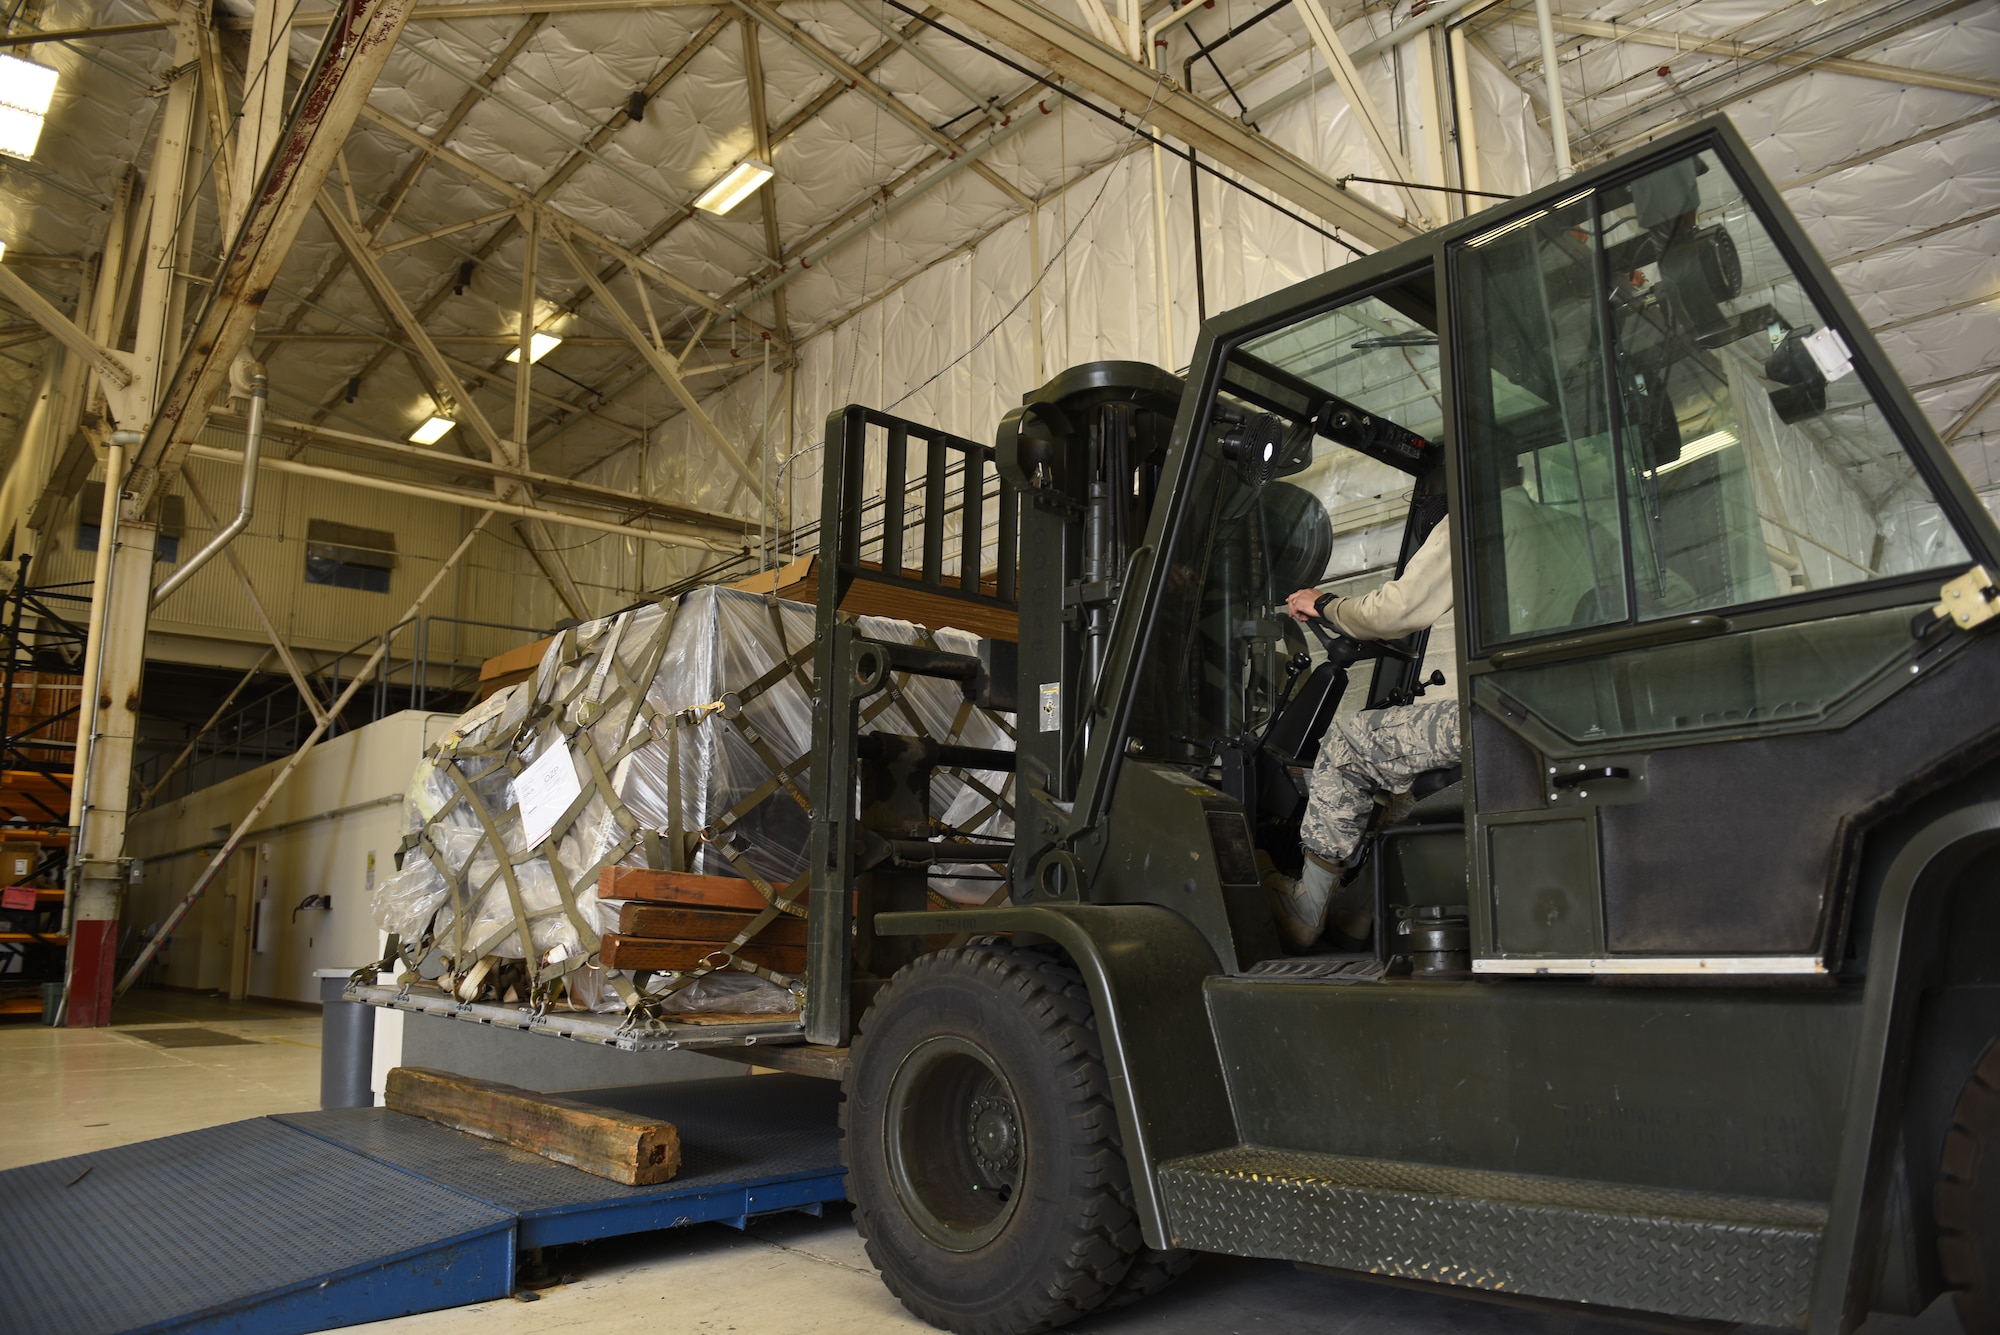 Staff Sgt. Rey Solis, 92nd Logistics Readiness Squadron vehicle maintenance, operates a forklift carrying cargo to be loaded onto a KC-135 Stratotanker at Fairchild Air Force Base, Washington, Sept. 21, 2018. LRS Airmen have a variety of mission sets including vehicle maitnenance, individual protection equipment, air transportation operations and more, which are essential to mission success. (U.S. Air Force phot/Airman 1st Class Lawrence Sena)